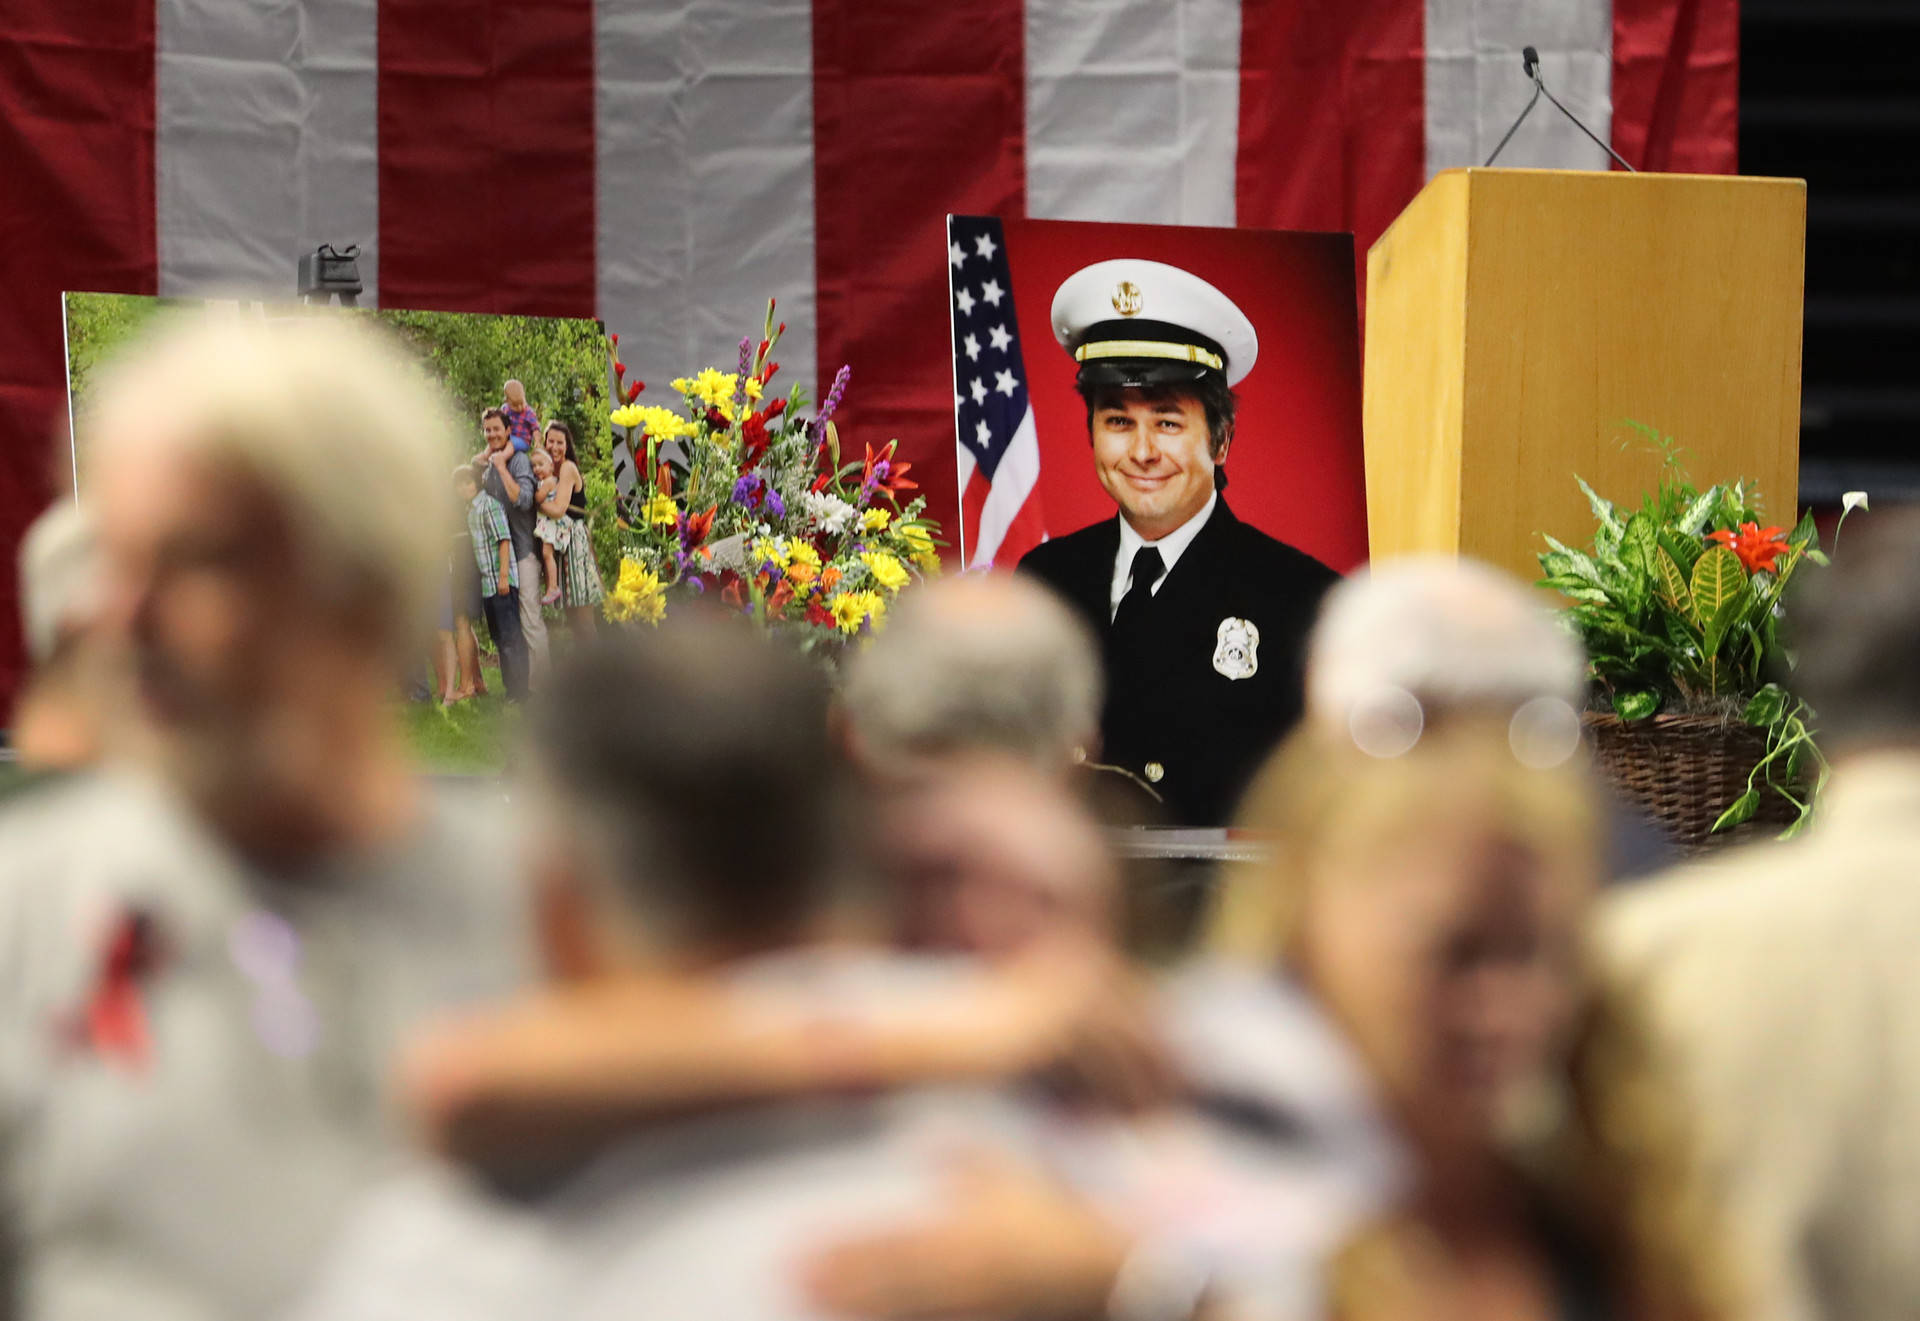 A picture of Battalion Chief Matthew David Burchett, sits on stage as mourners hug each other before his funeral at the Maverik Center on Aug., 20, 2018, in West Valley City, Utah. George Frey/Getty Images